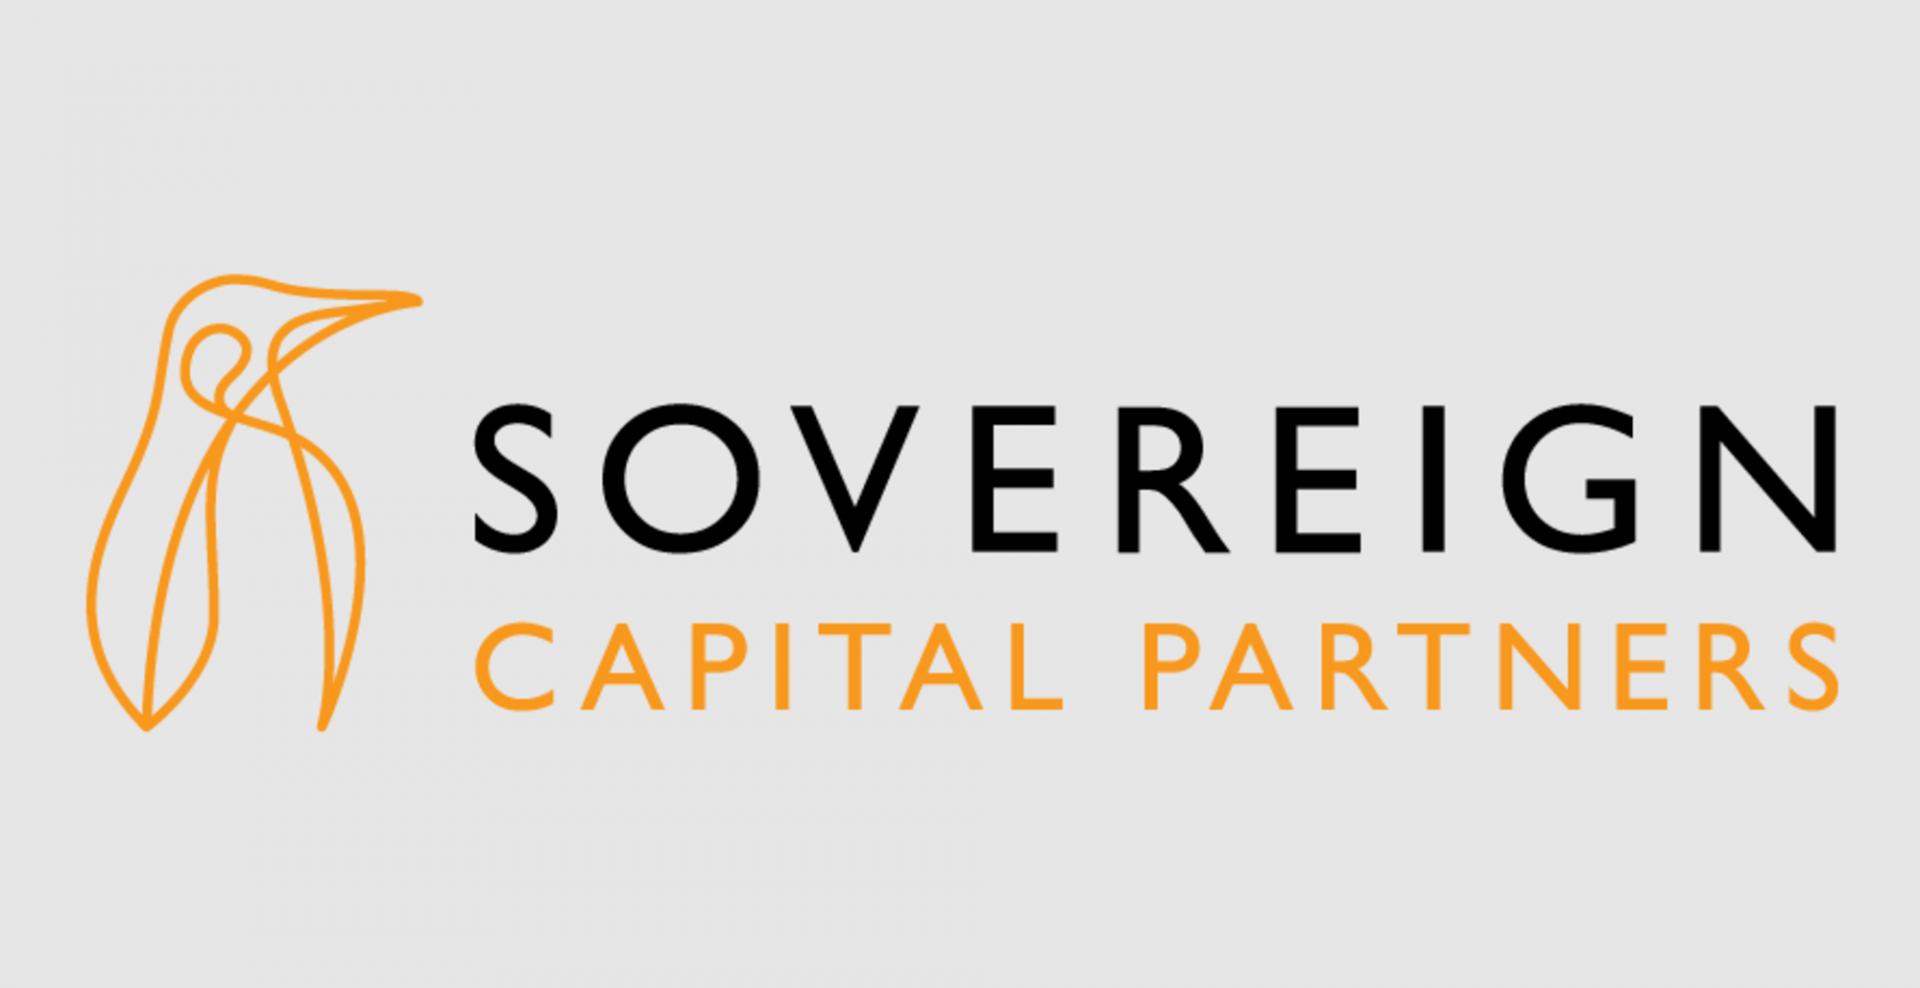 PE firm Sovereign makes £55m investment in wealth manager